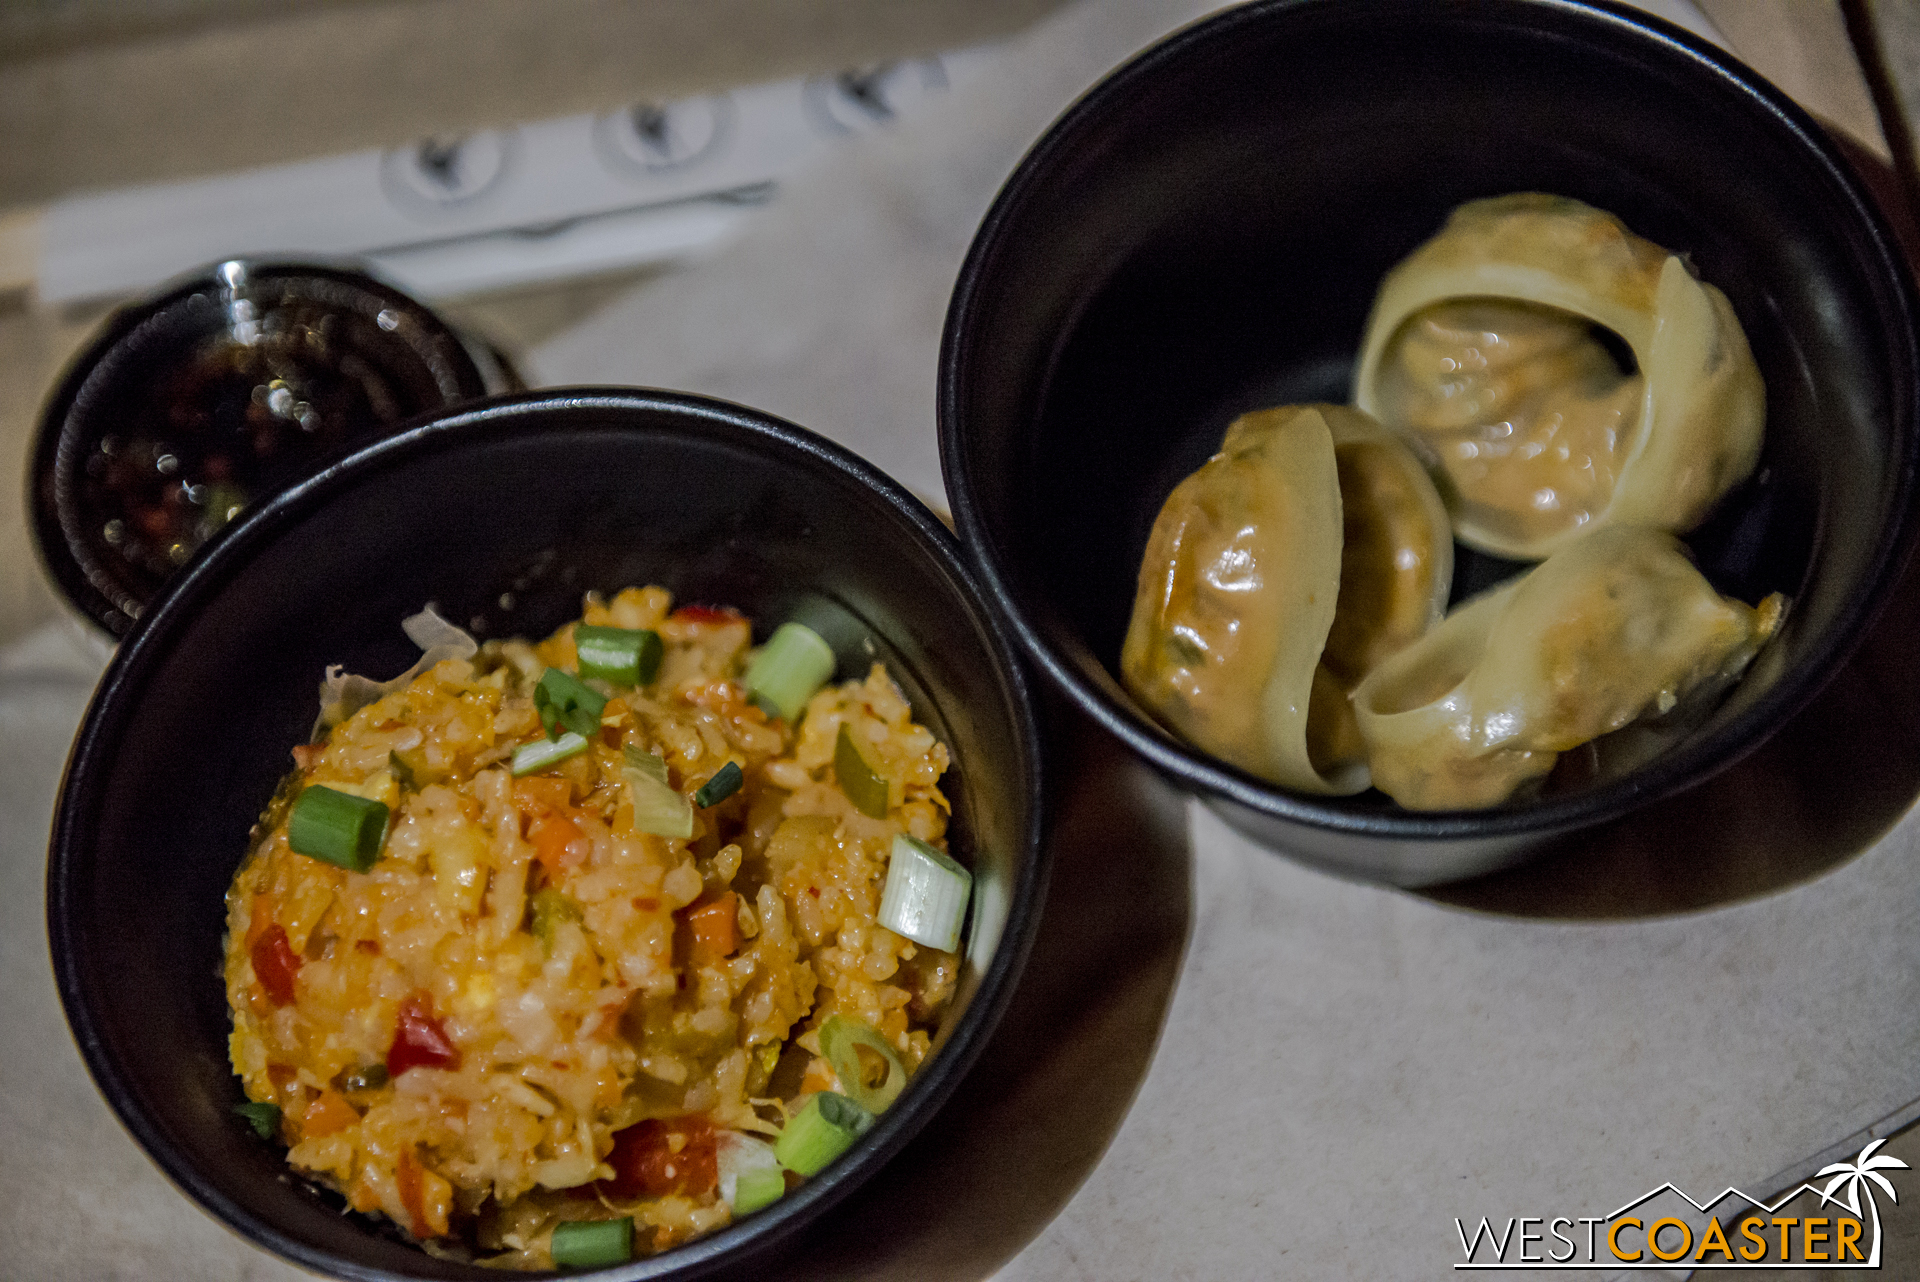  Kimchi Vegetable Fried Rice... actually very tasty and full of garlic flavor, and probably the best Marketplace value in terms of fillingness per dollar.&nbsp; The Steamed Vegetable Dumplings were also delicious, especially when dipped in their sesa